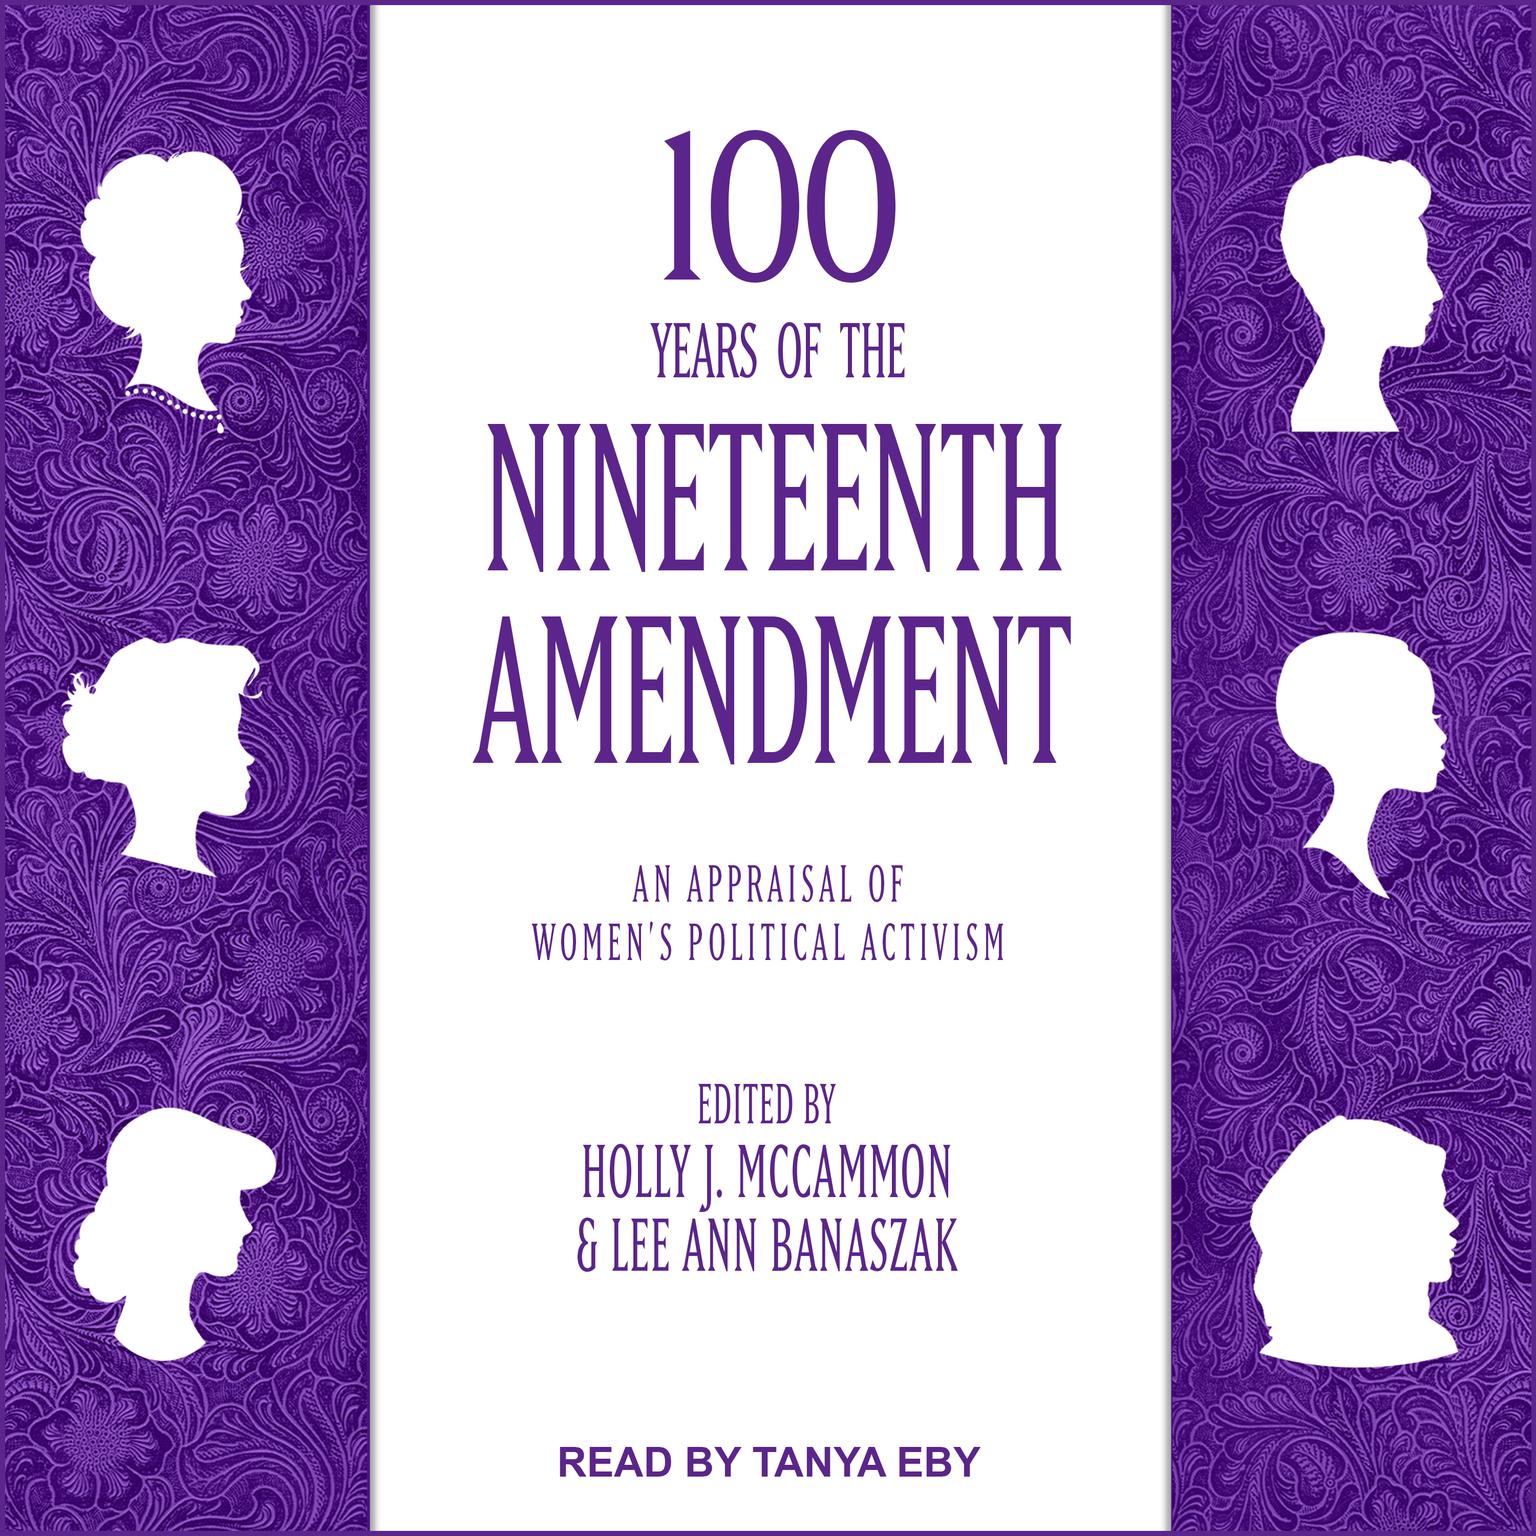 100 Years of the Nineteenth Amendment: An Appraisal of Womens Political Activism Audiobook, by Holly J. McCammon